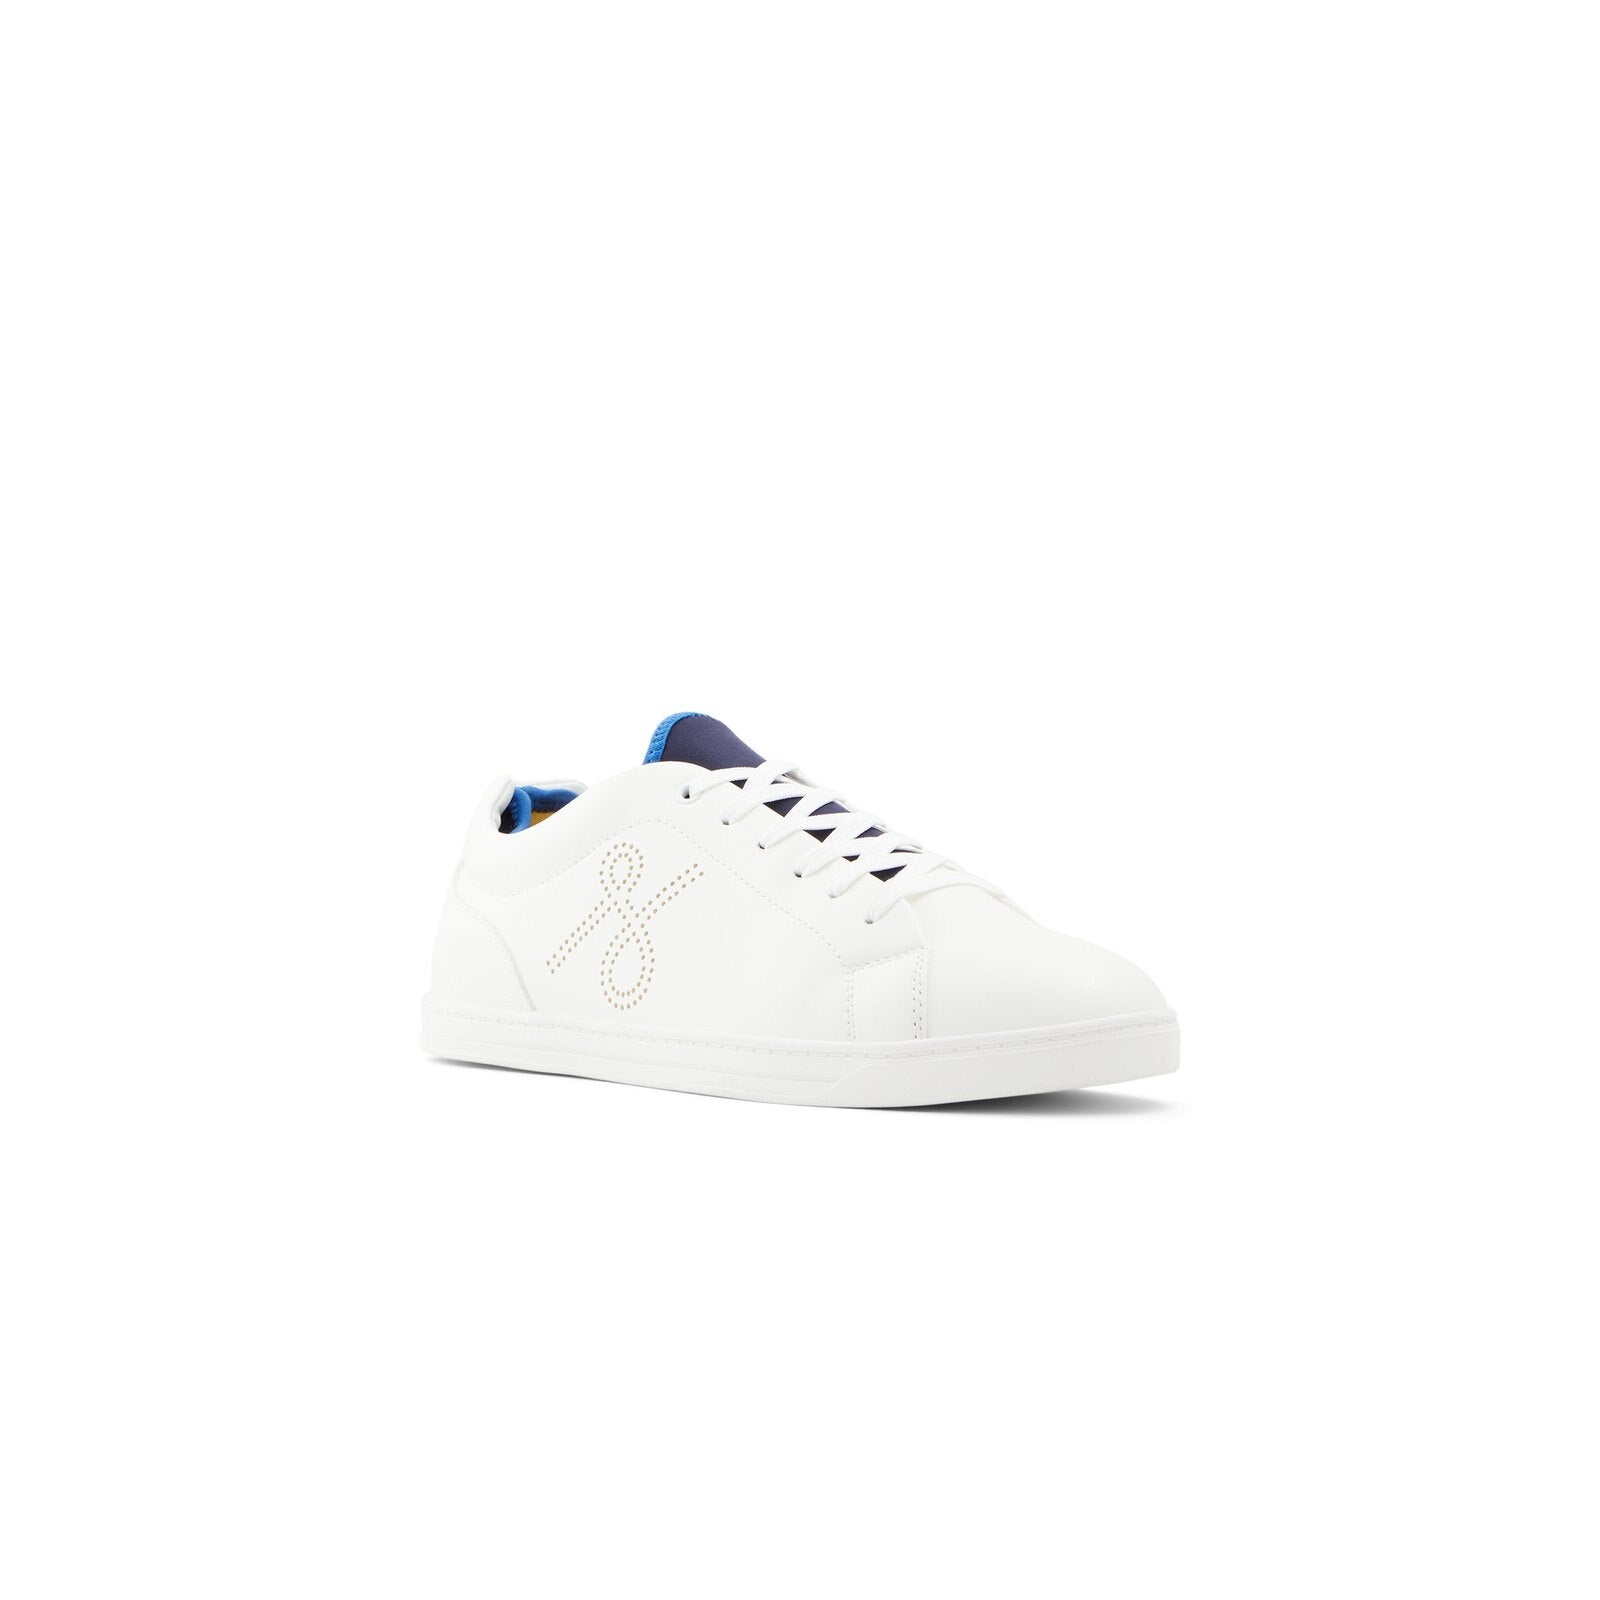 Luther / Casual Shoes Men Shoes - White - CALL IT SPRING KSA